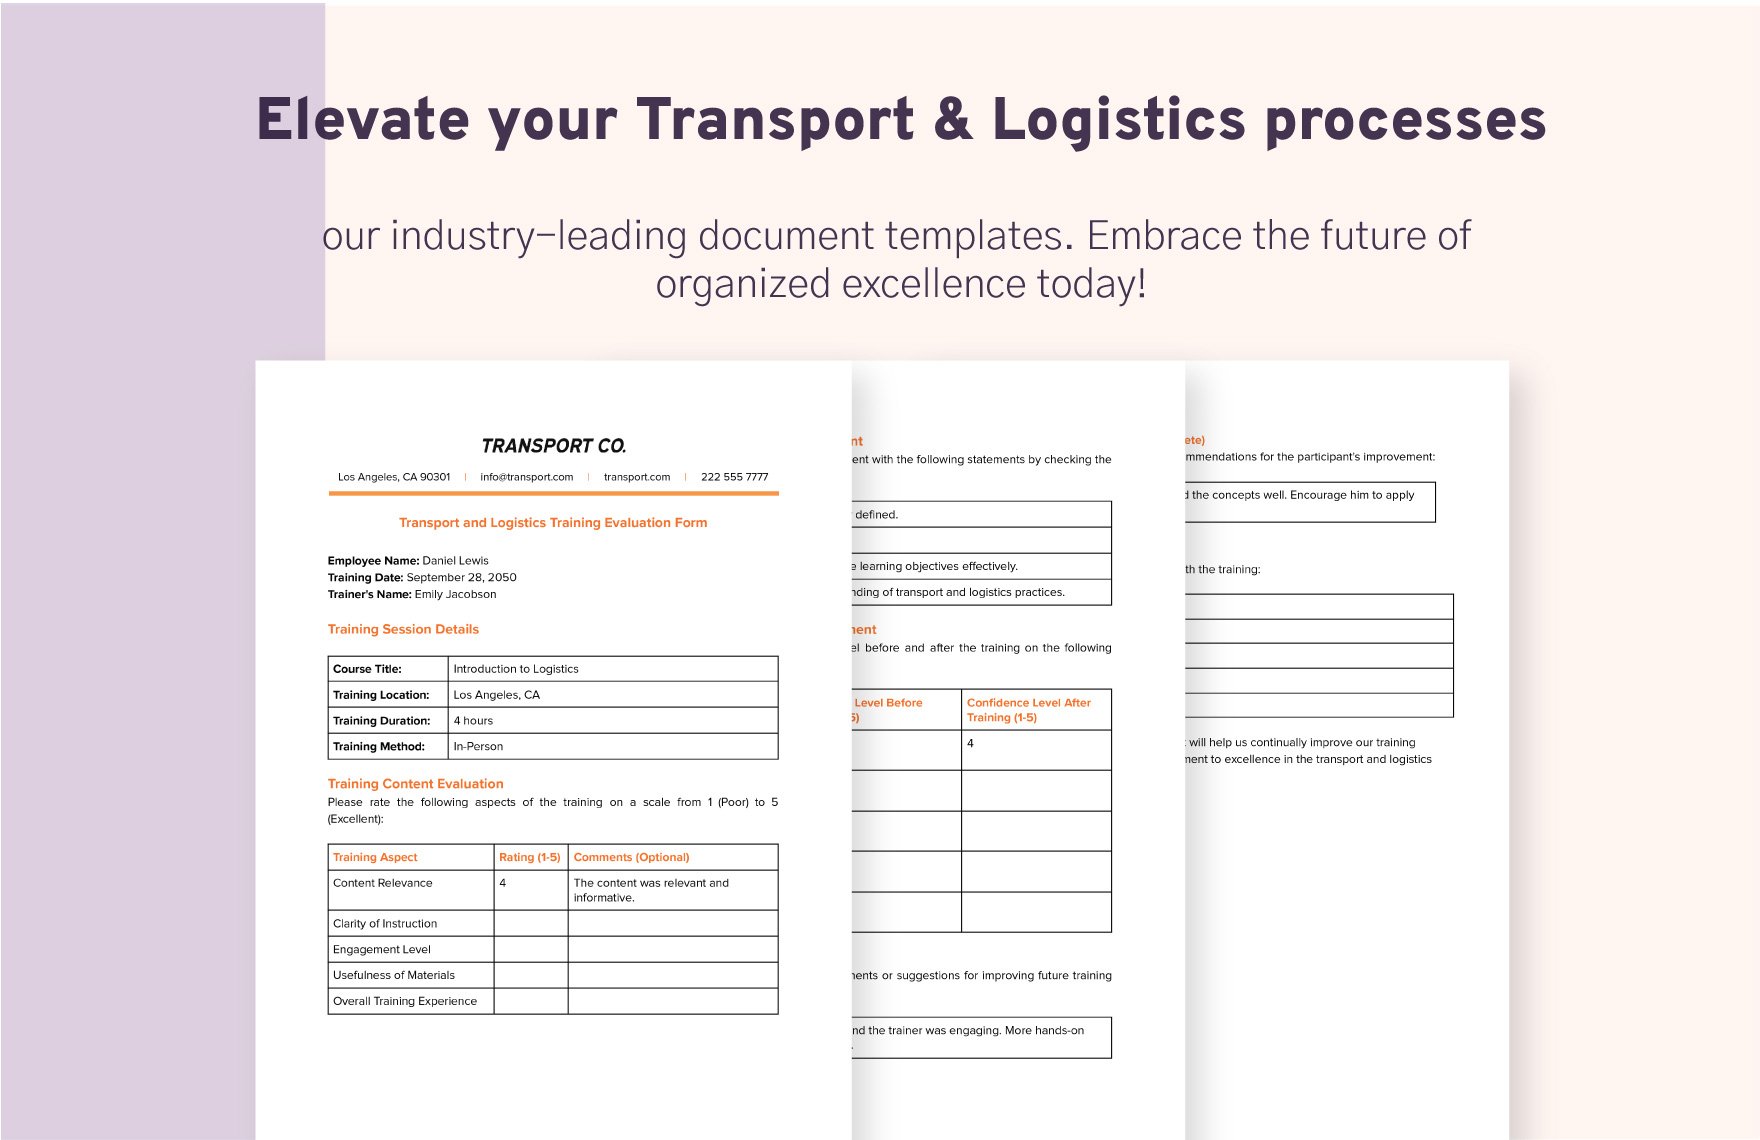 Transport and Logistics Training Evaluation Form Template